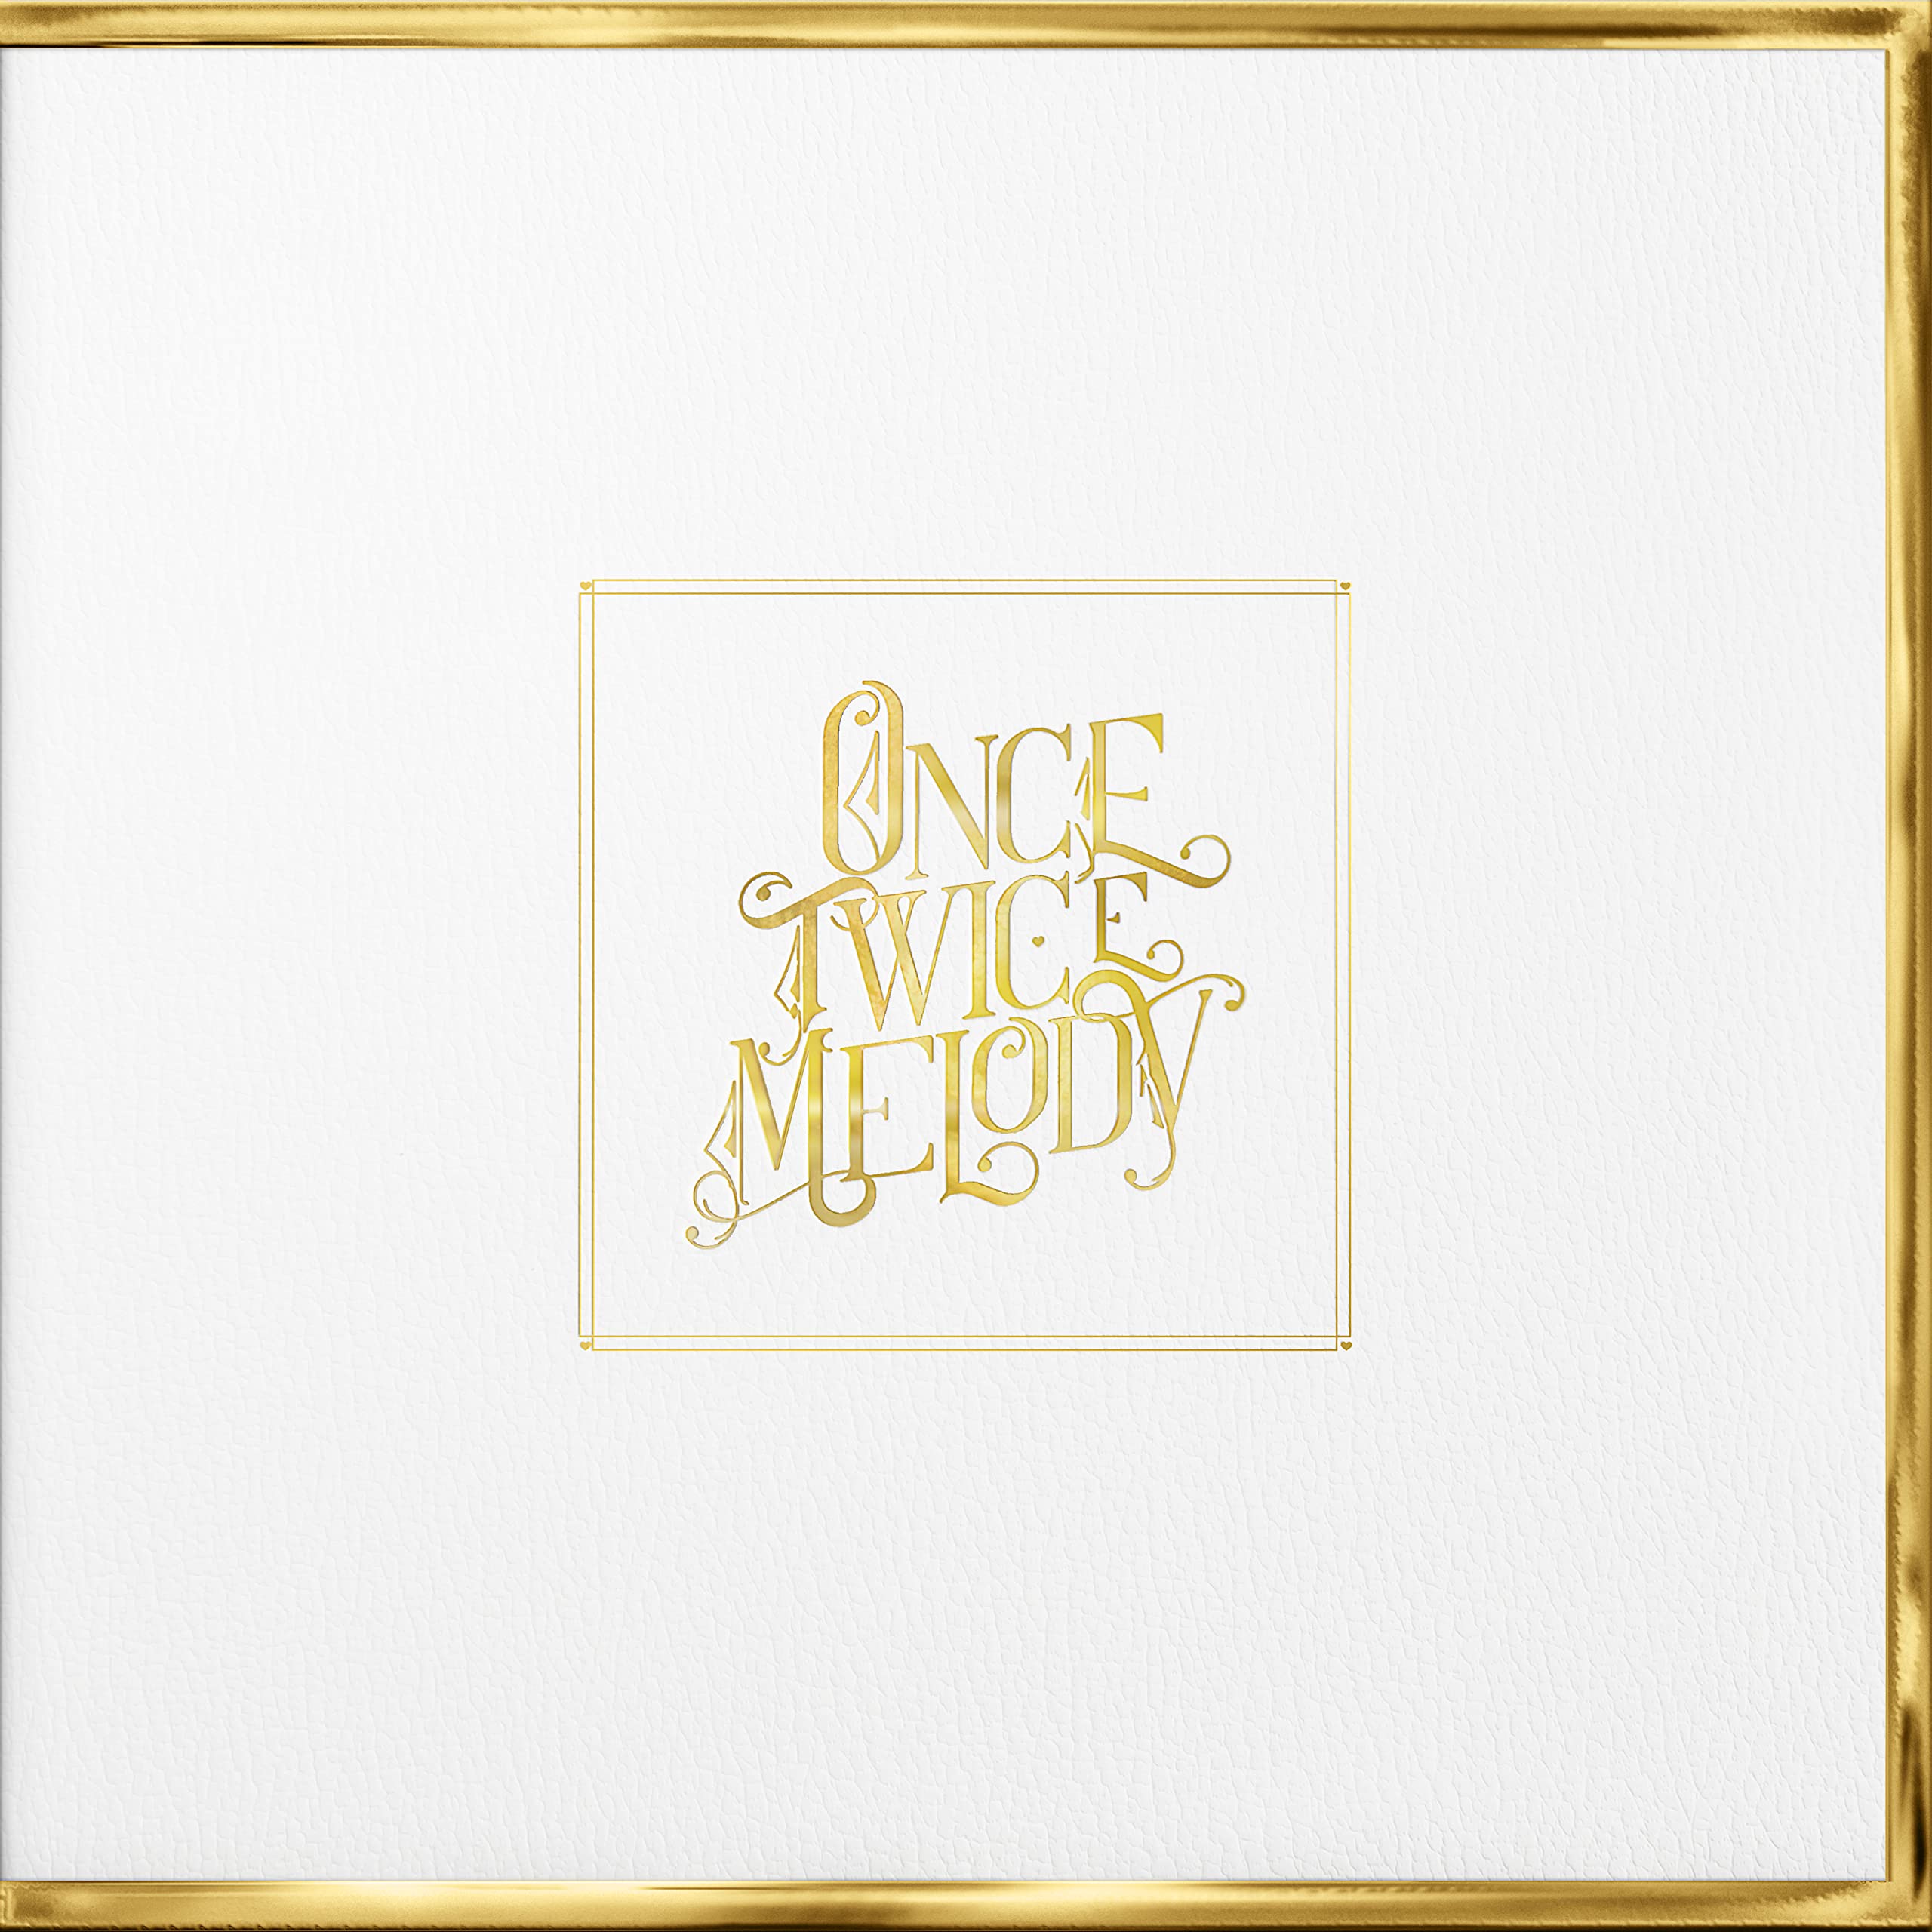 Beach House - Once Twice Melody Chapter 2 (2021) [Official Digital Download 24bit/48kHz]